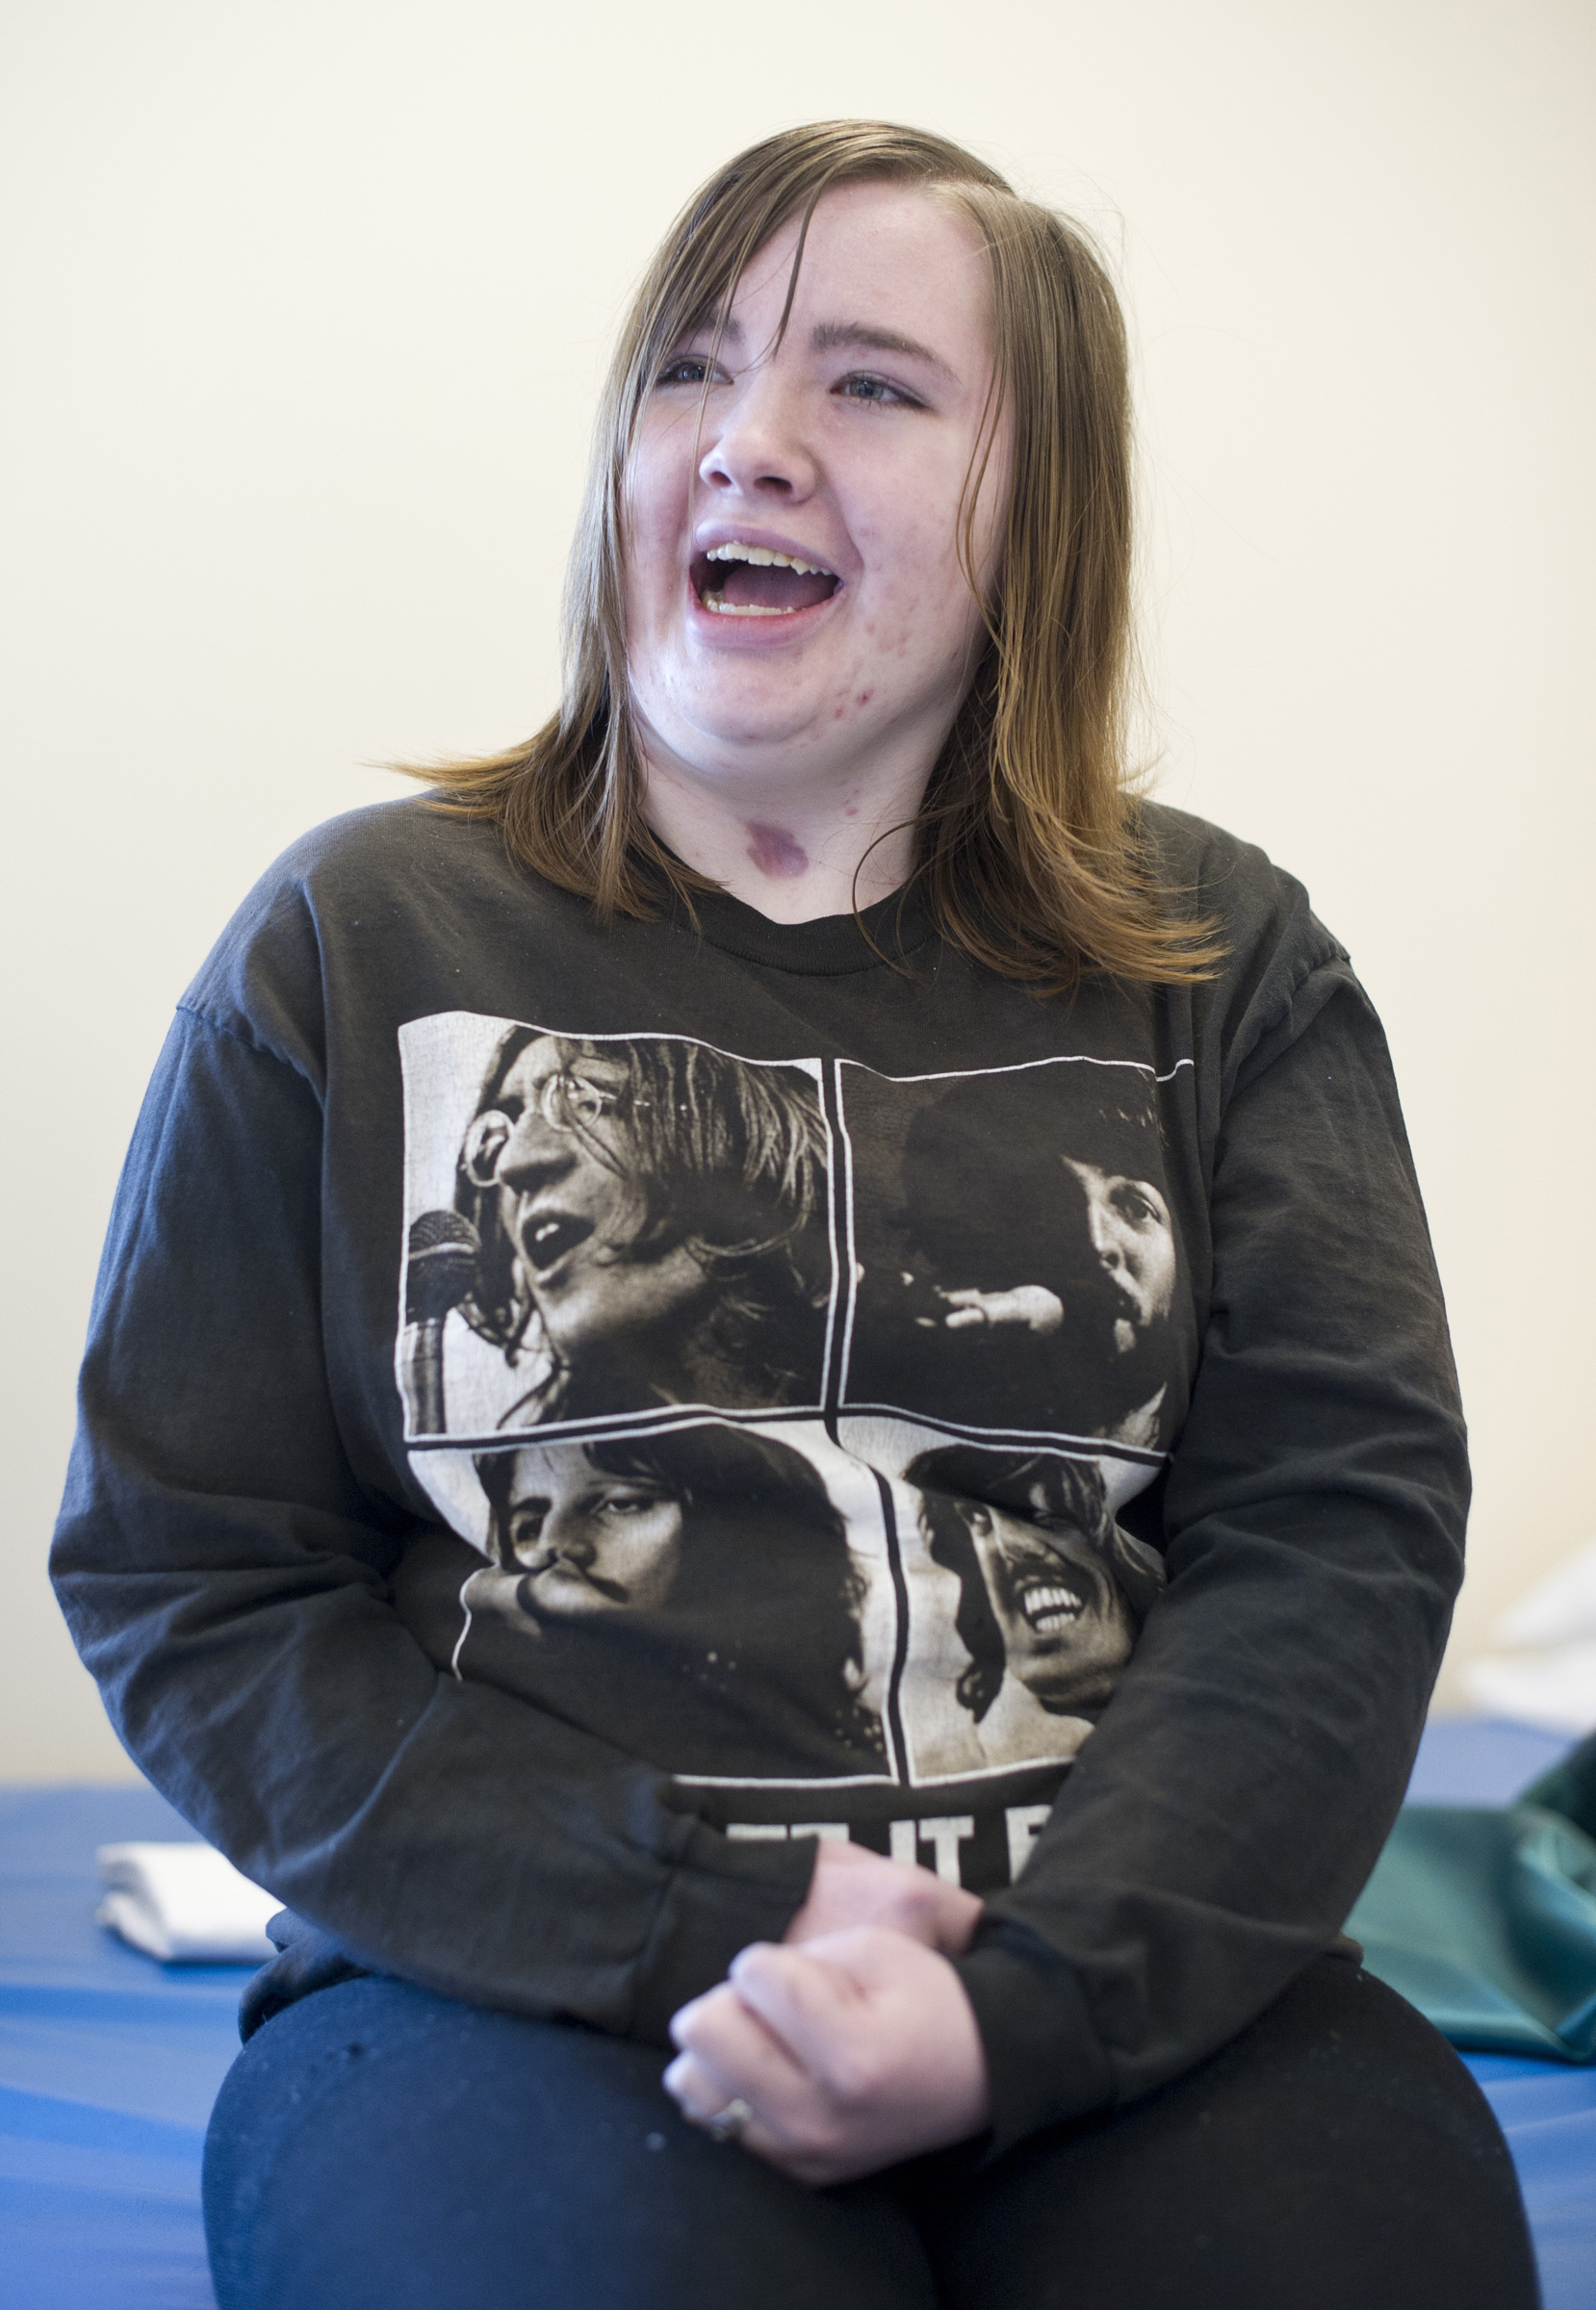 Samantha Chase, 15, talks about her illness at Bartlett Regional Hospital on Wednesday, Feb. 1, 2017. Chase has transverse myelitis, which is an inflammation of the spinal cord that damages the nerve fibers, making her paralyzed. Fundraising is going on in Gustavus and Juneau for an FES300 Cycle which is designed to help physically rehabilitate those with neurological disorders like Chase who is trying to regain use of her arms and legs. (Michael Penn|Juneau Empire)